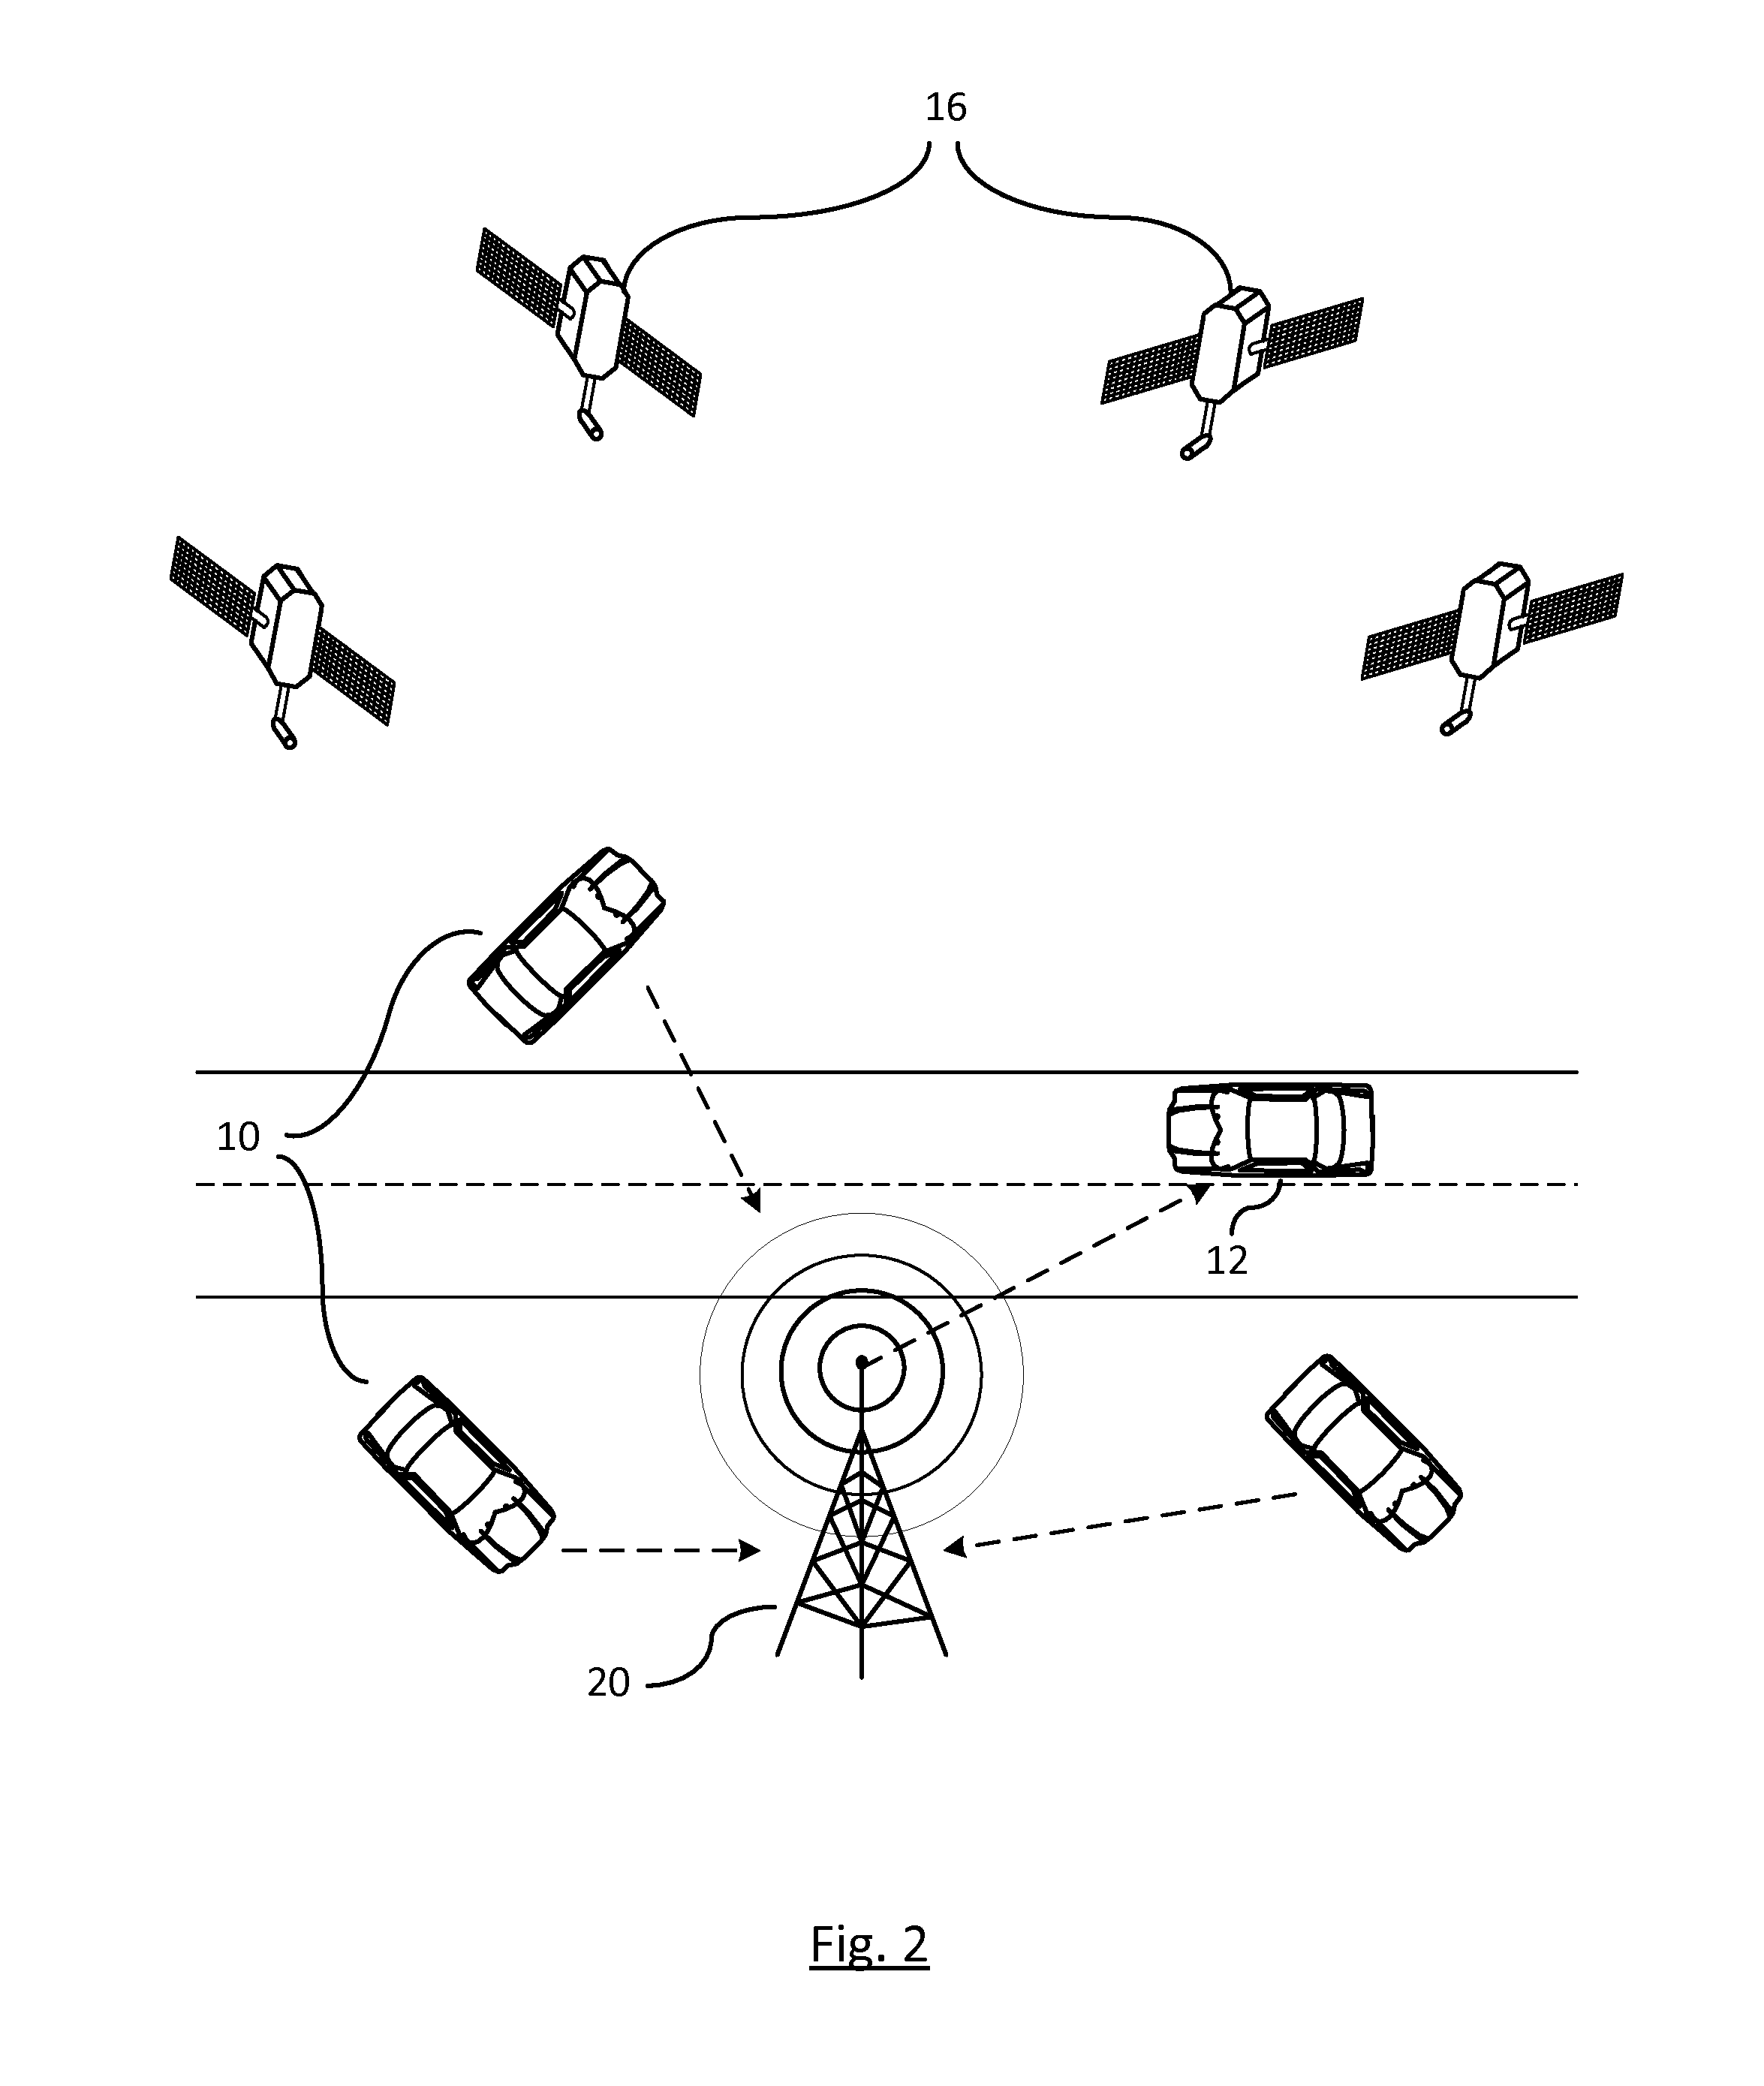 AD-HOC differential GPS referencing using parked vehicles